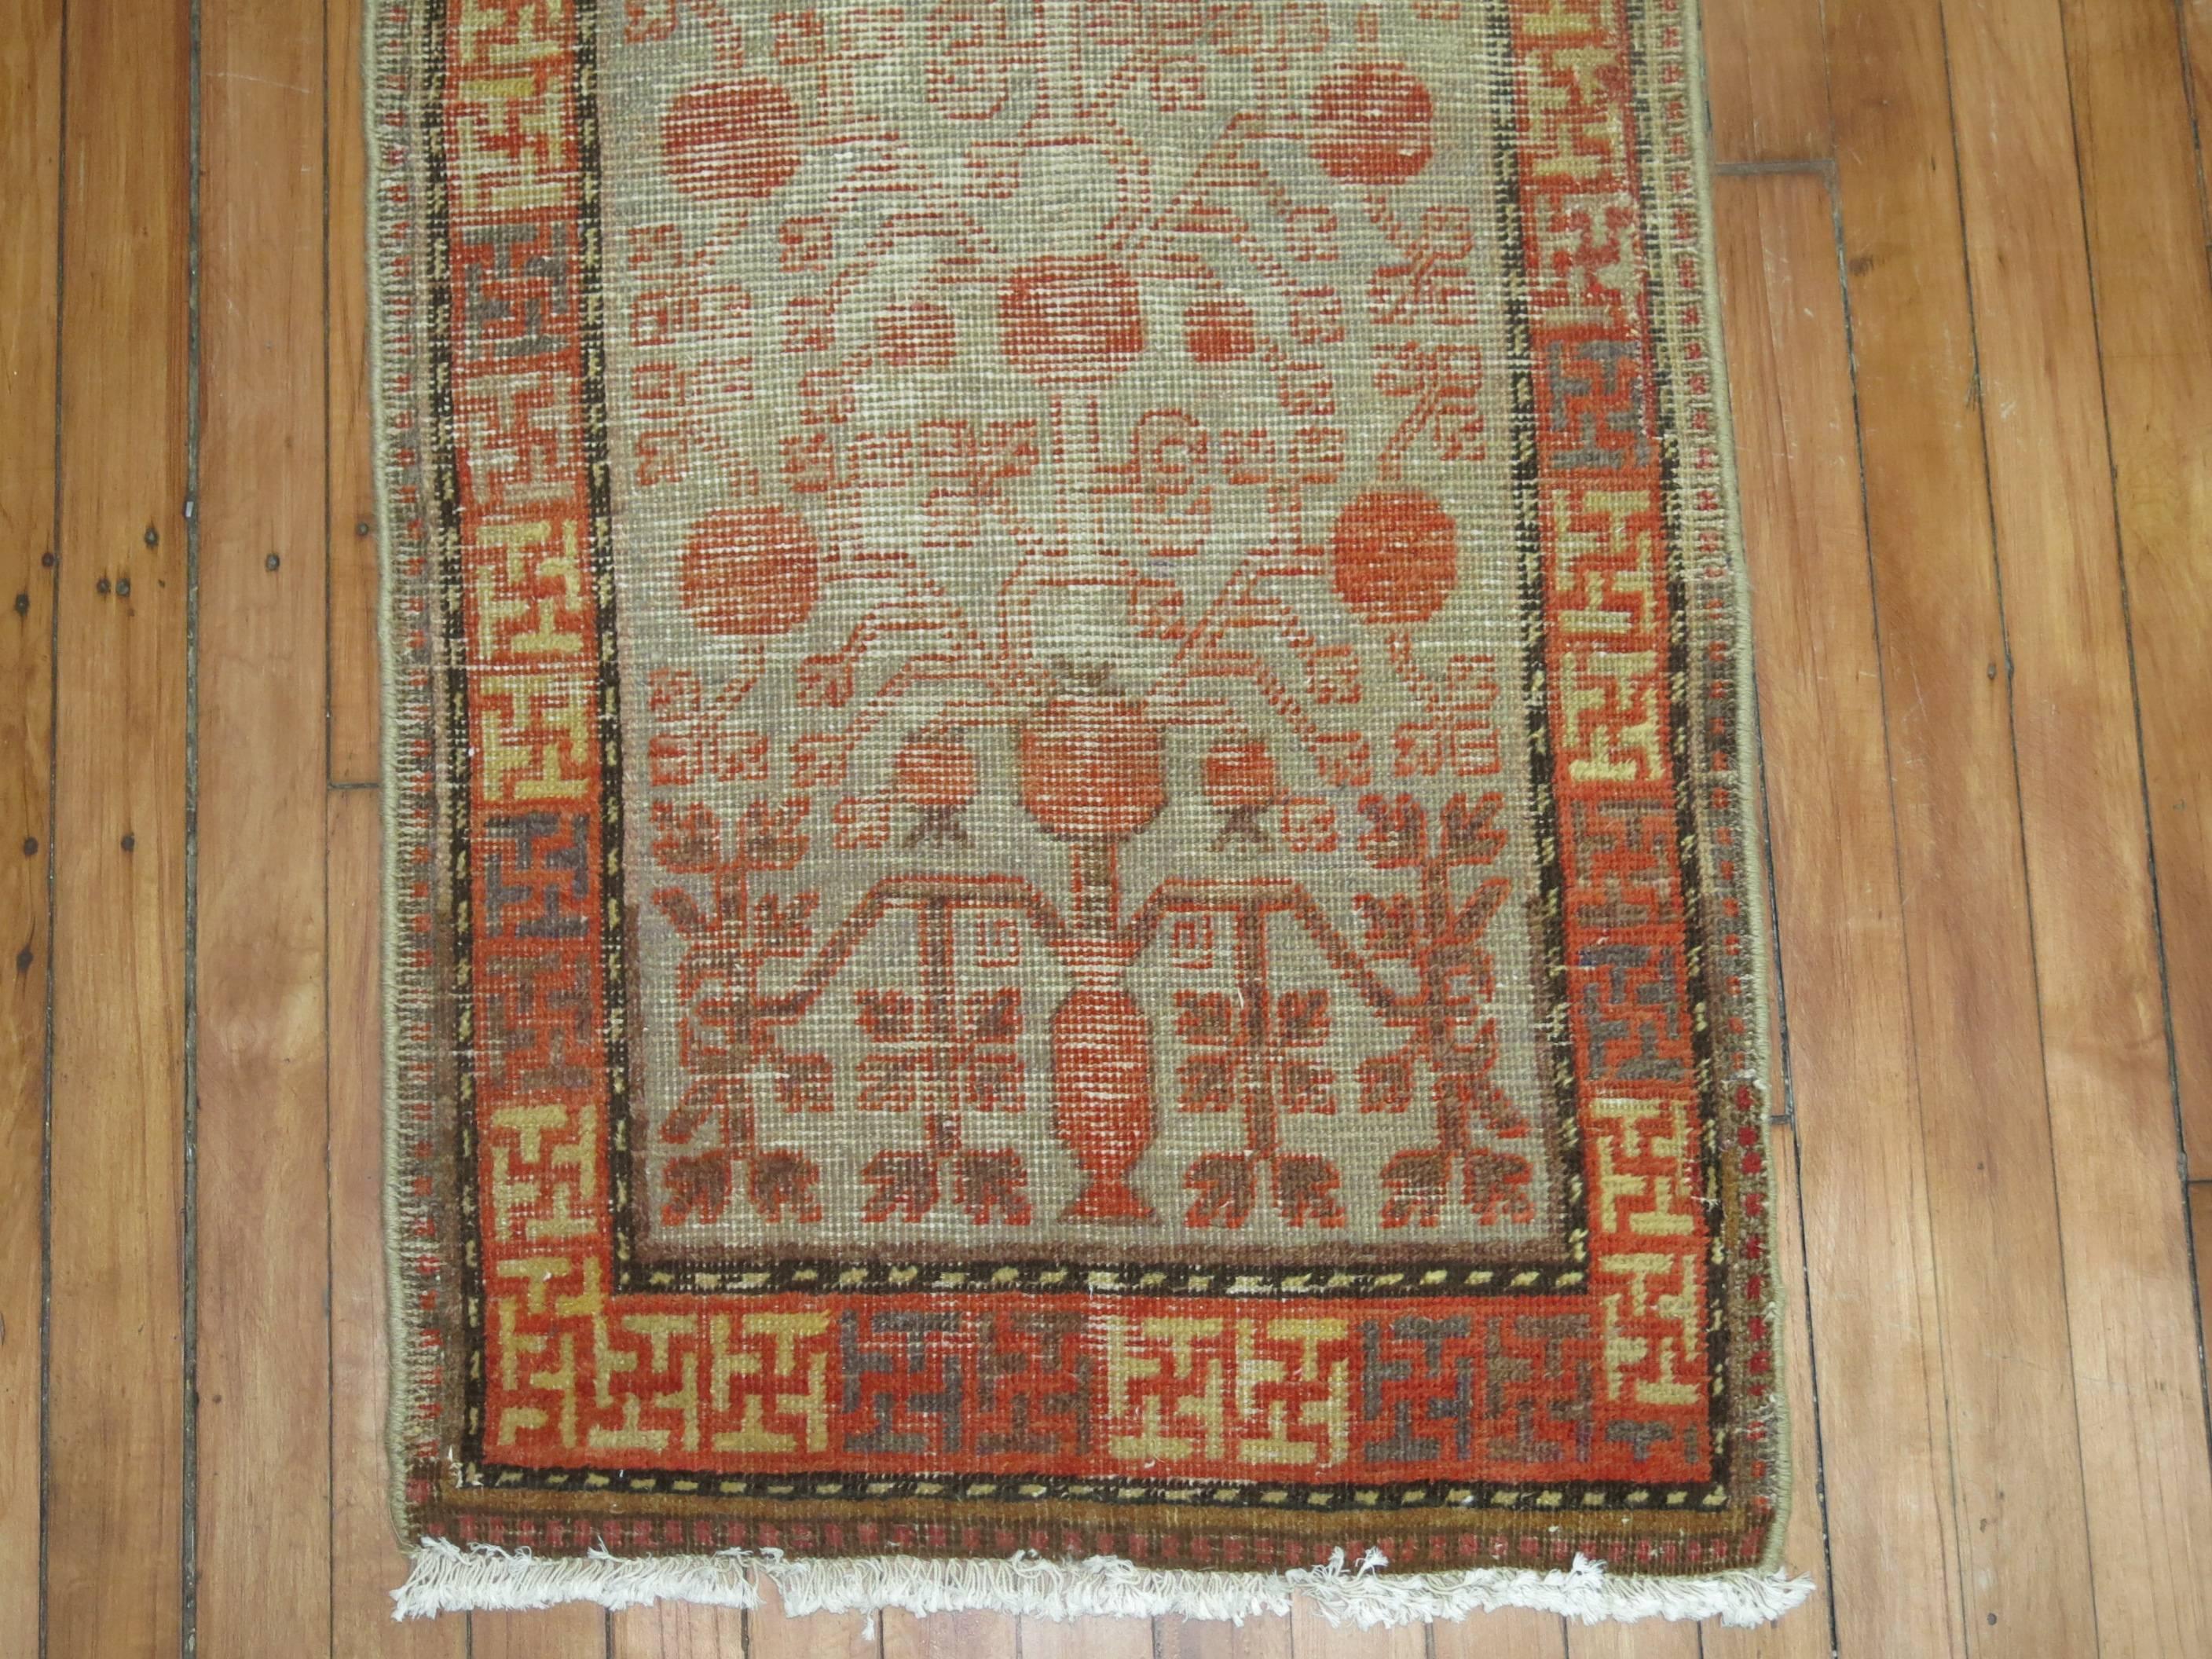 Small worn Khotan runner with a pomegranate design surrounded by a intricate border.